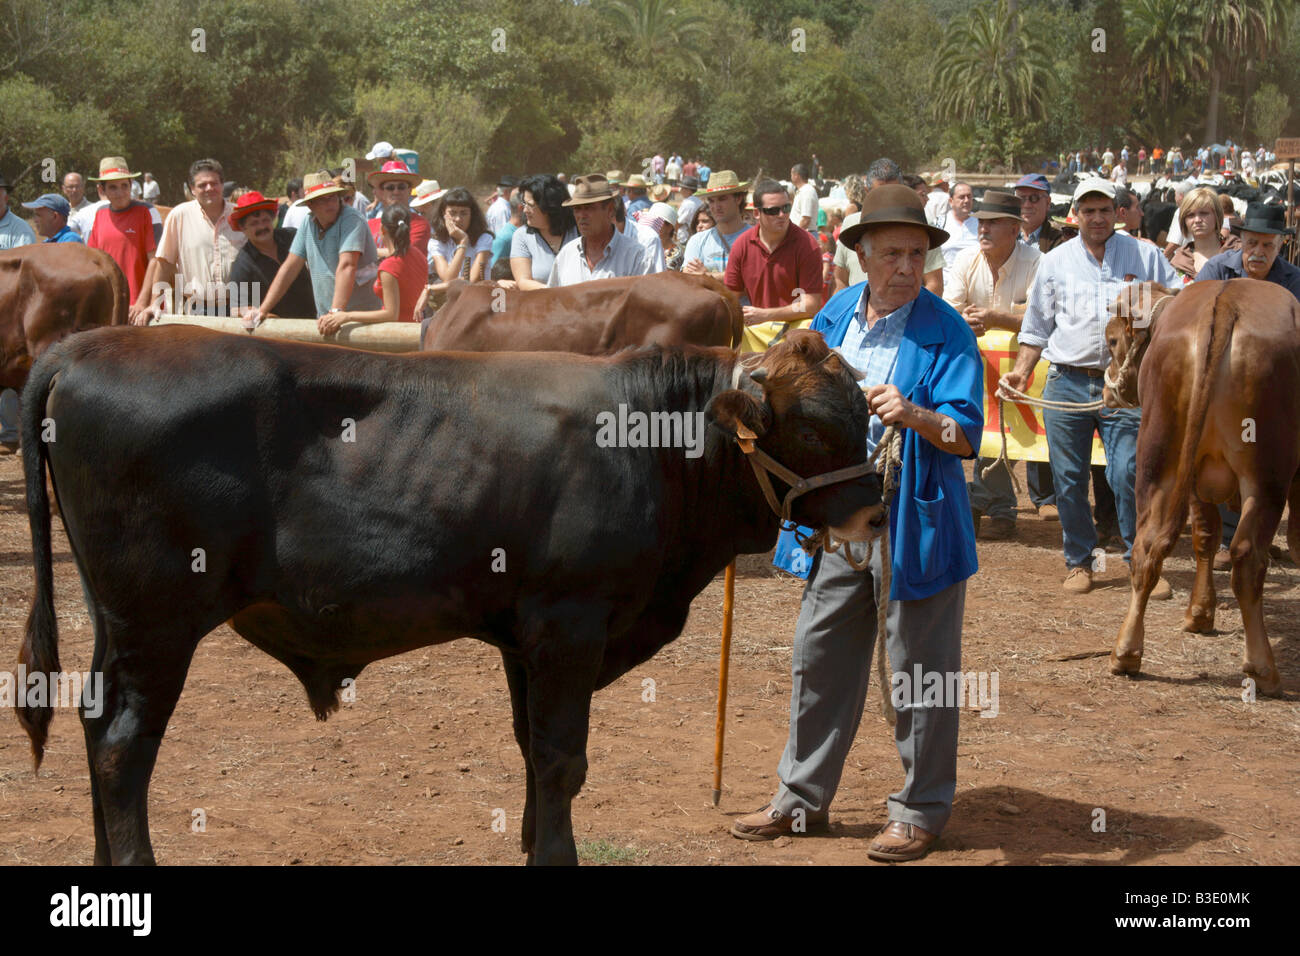 Spanish farmers with bulls in judging ring at agricultural show on Gran Canaria in the Canary Islands. Stock Photo